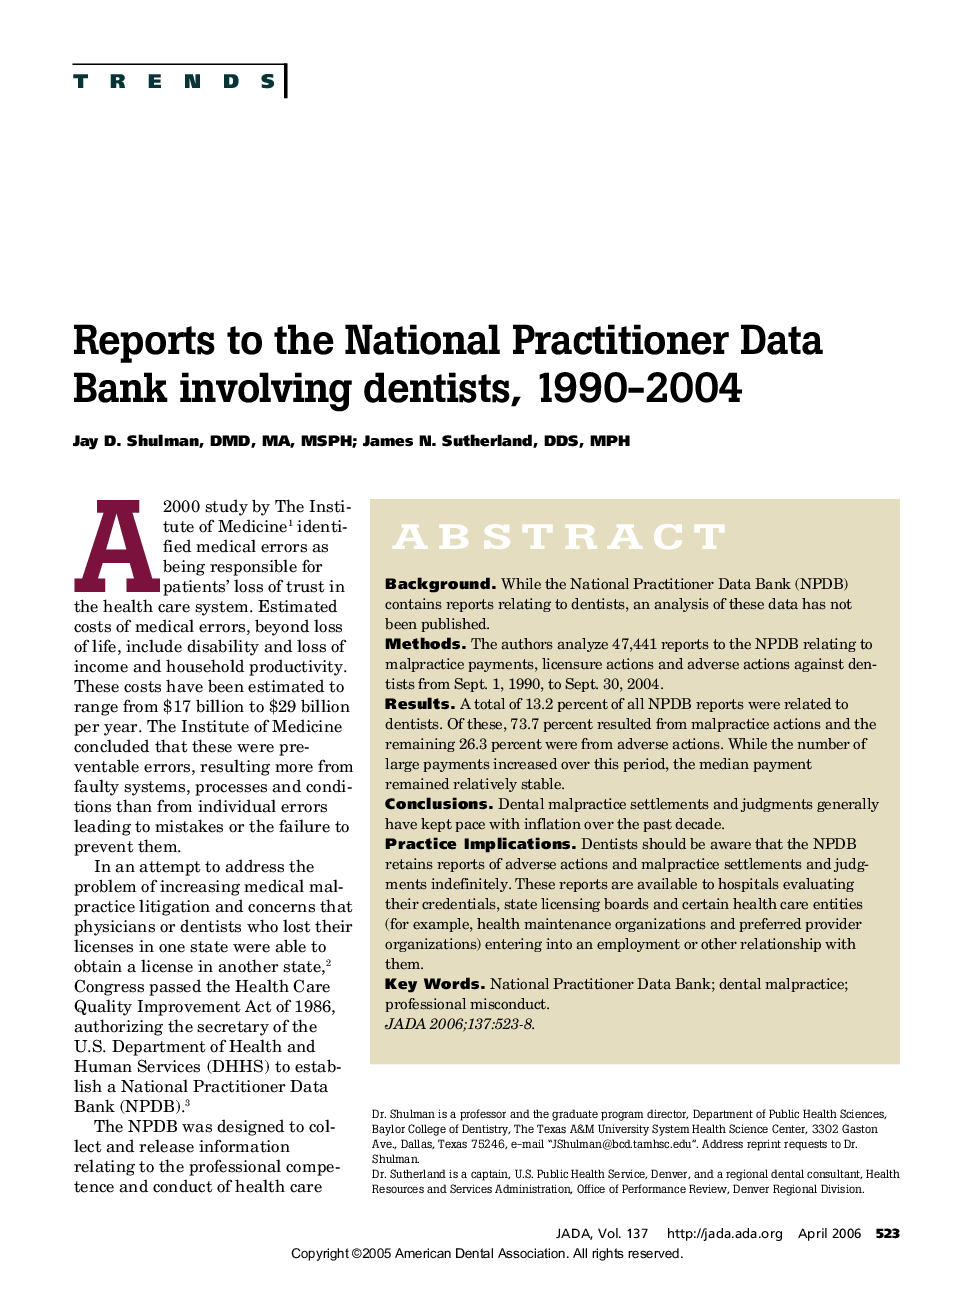 Reports to the National Practitioner Data Bank involving dentists, 1990-2004